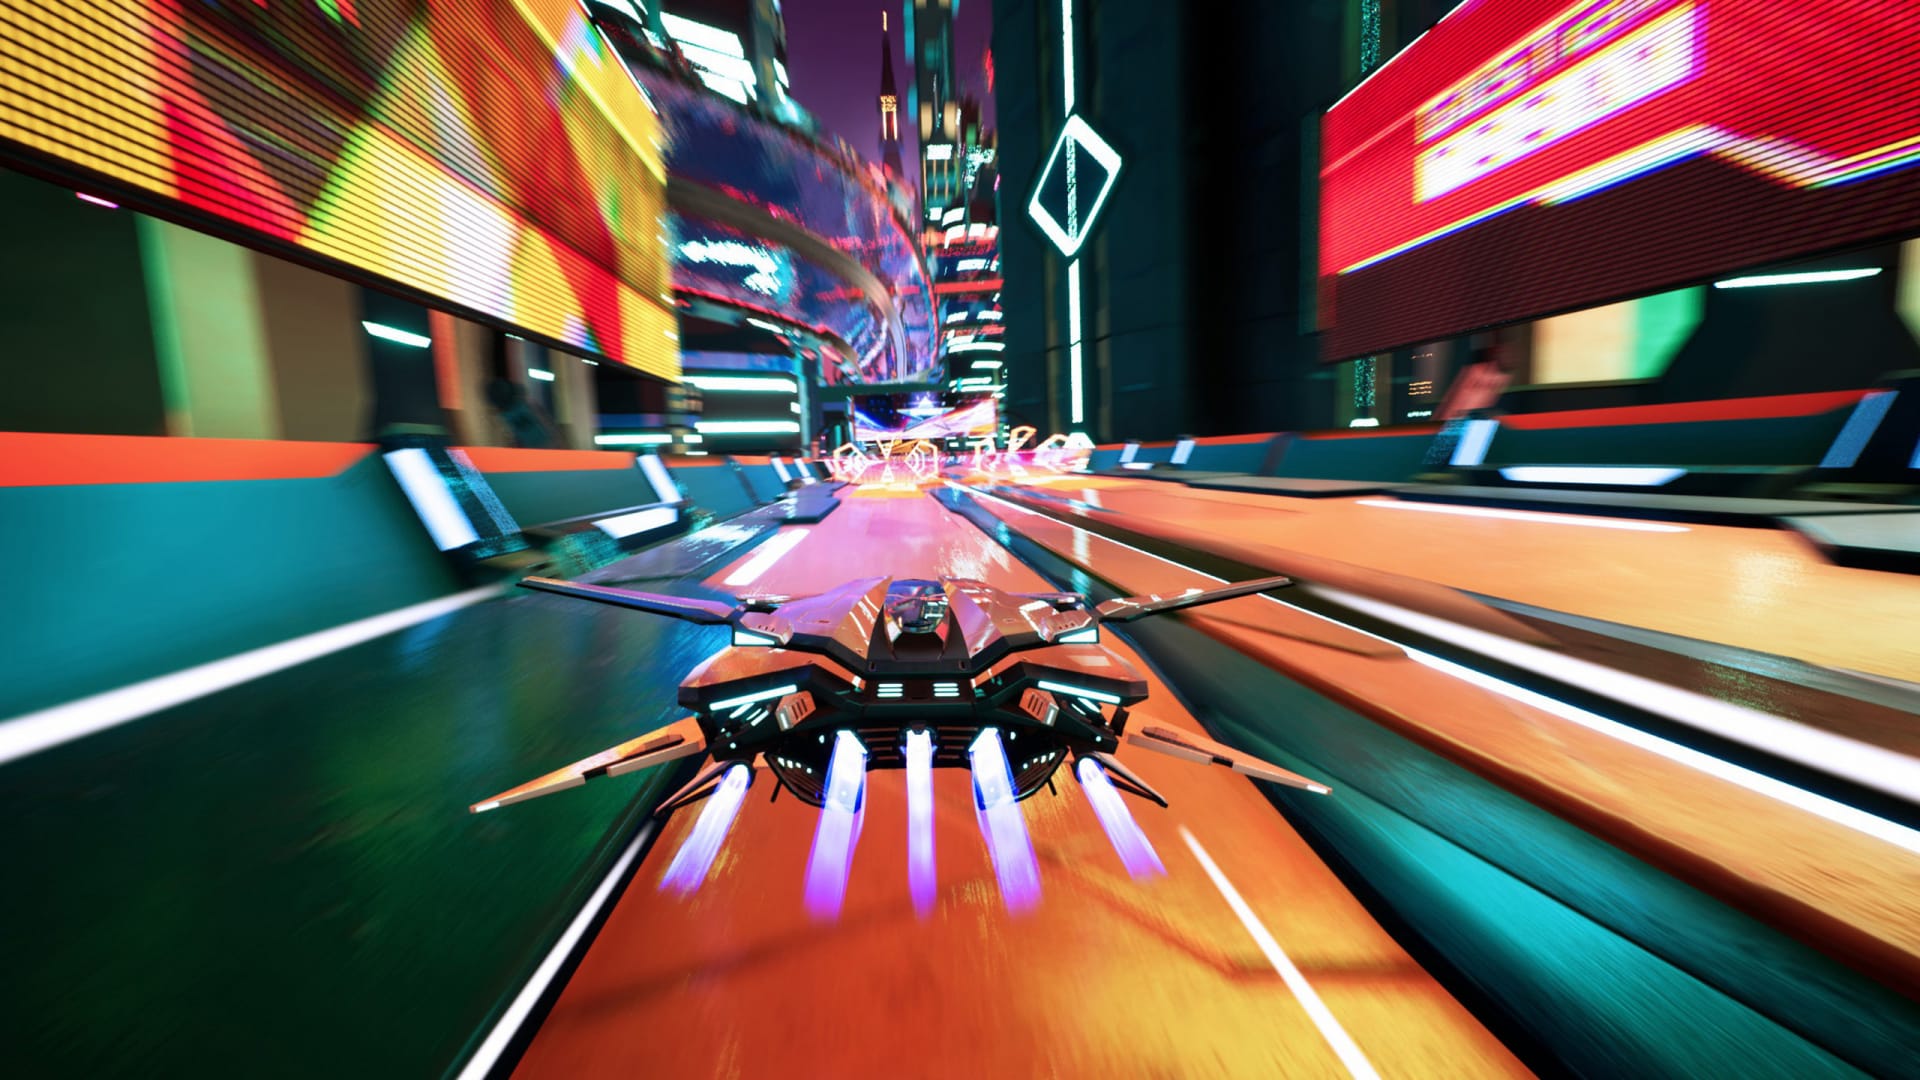 It's also Redout 2